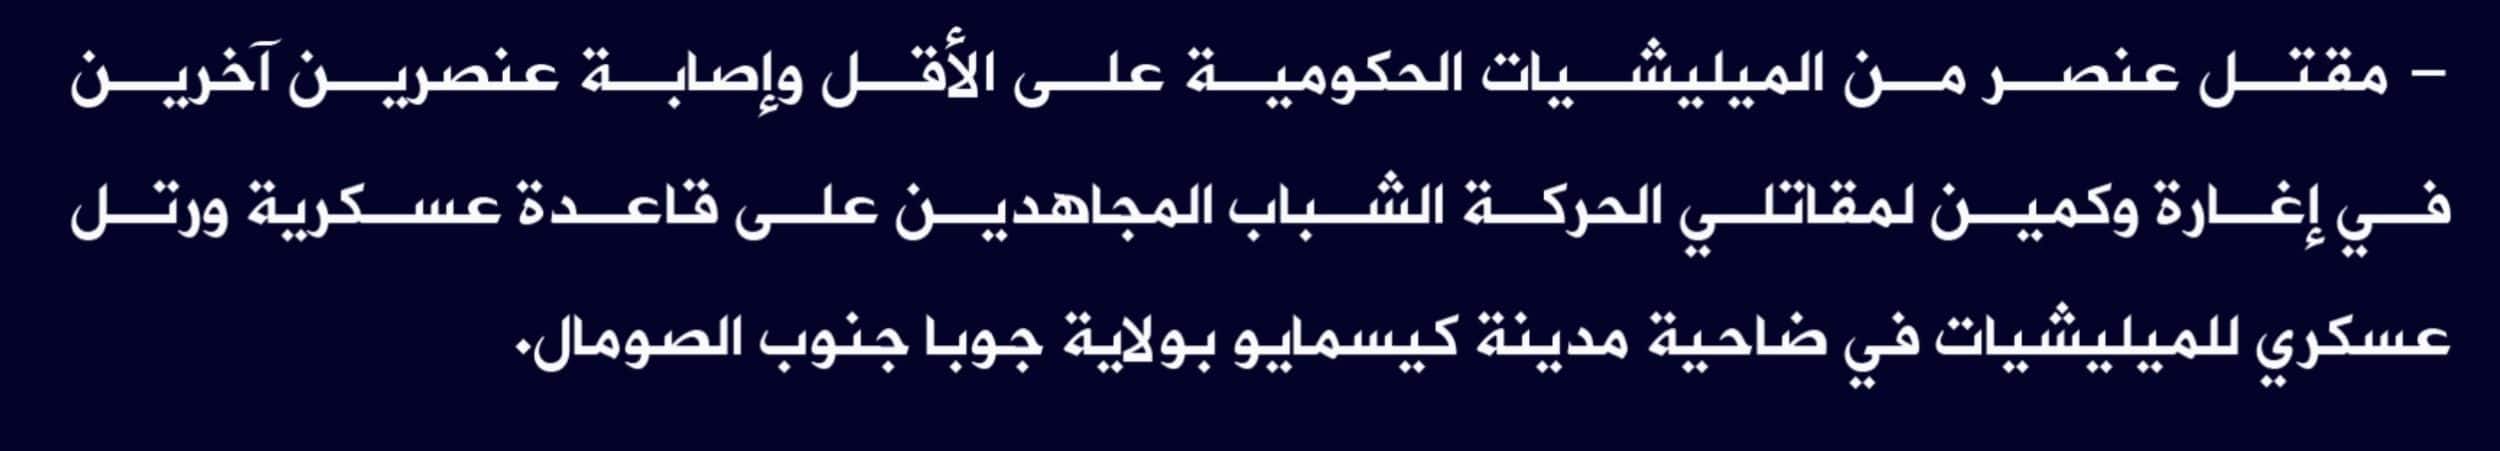 (Claim) al-Shabaab: A Somalian Army Element Was Killed and Two Others Were Injured in an Ambush and an Attack on a Military Base and a Convoy in Kismayo City, Juba State, Southern Somalia - 9 June 2022